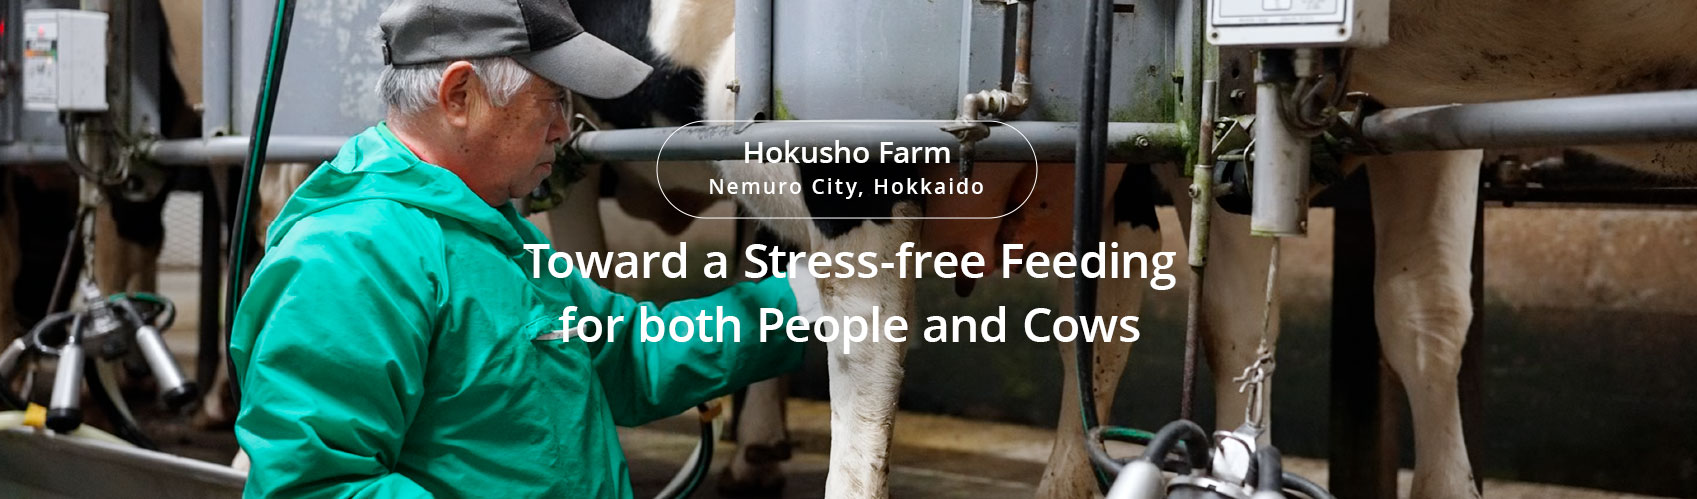 CASE2 Toward a Stress-free Feeding for both People and Cows